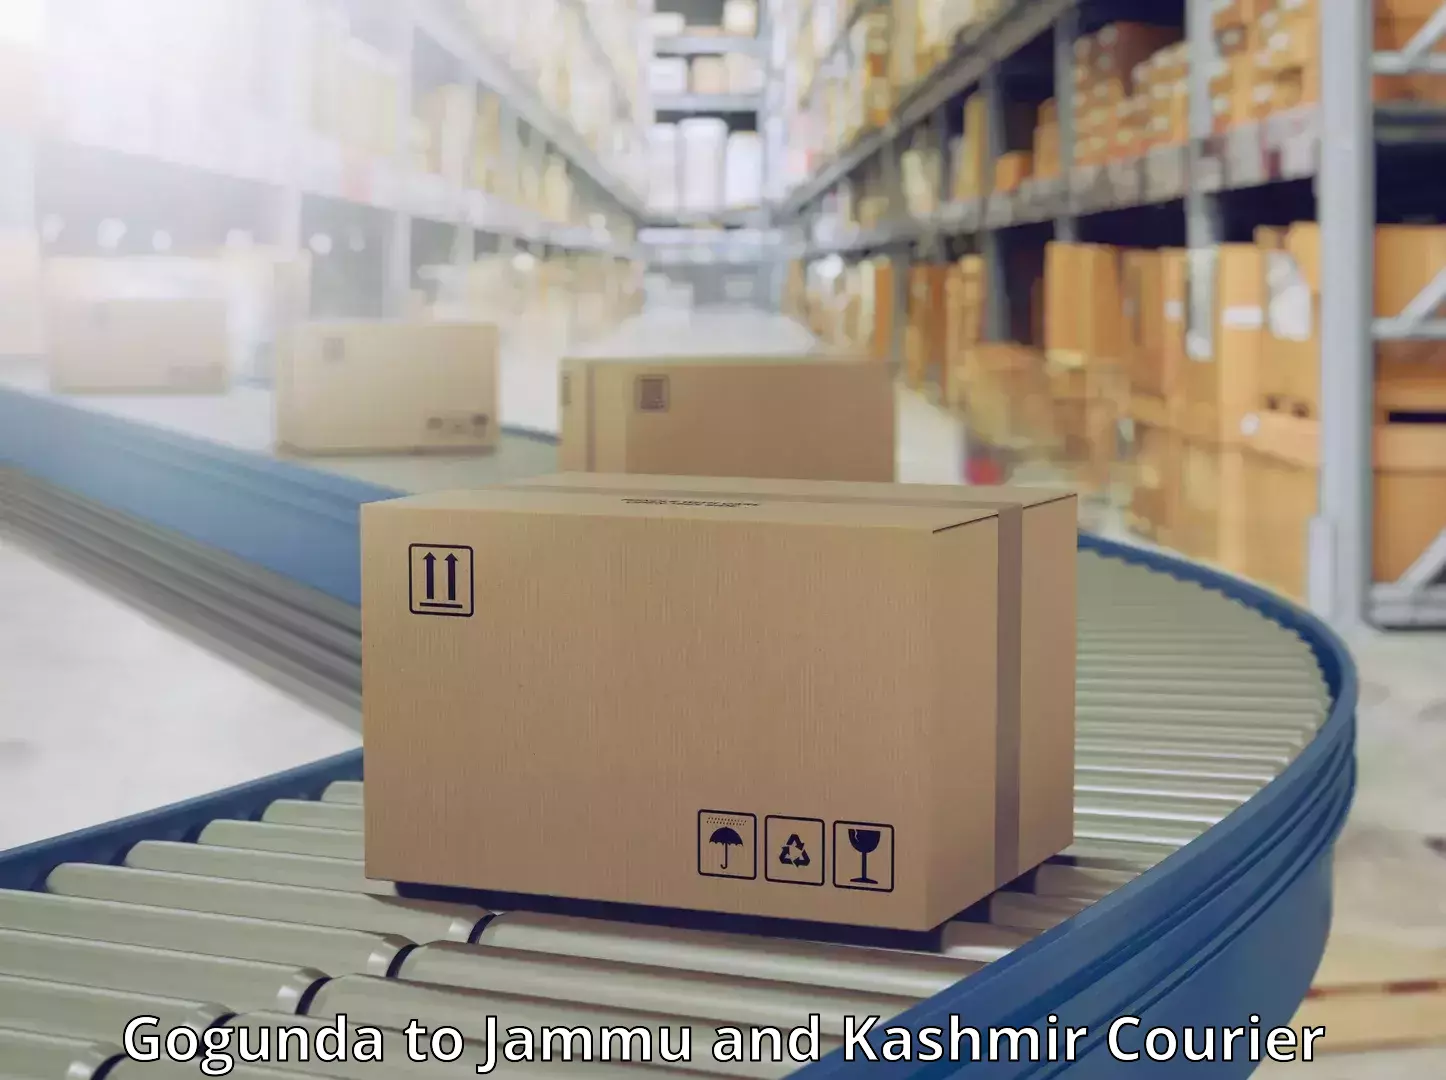 Reliable courier services Gogunda to Jammu and Kashmir